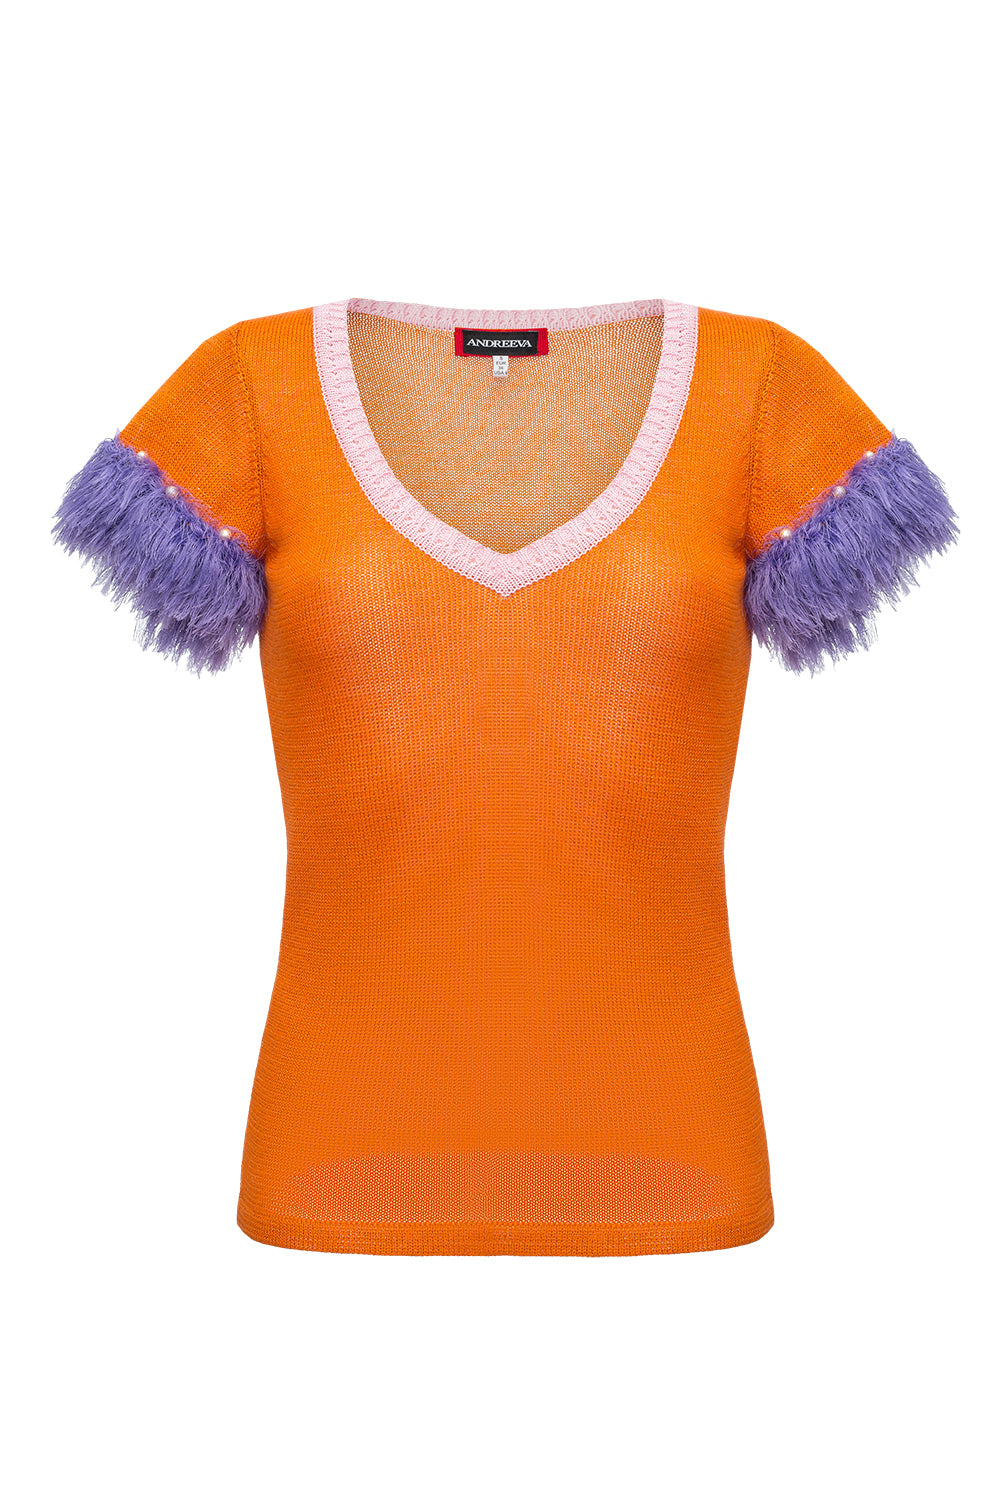 Women’s Yellow / Orange Golden Poppy Knit Top With Handmade Knit Details Large Andreeva